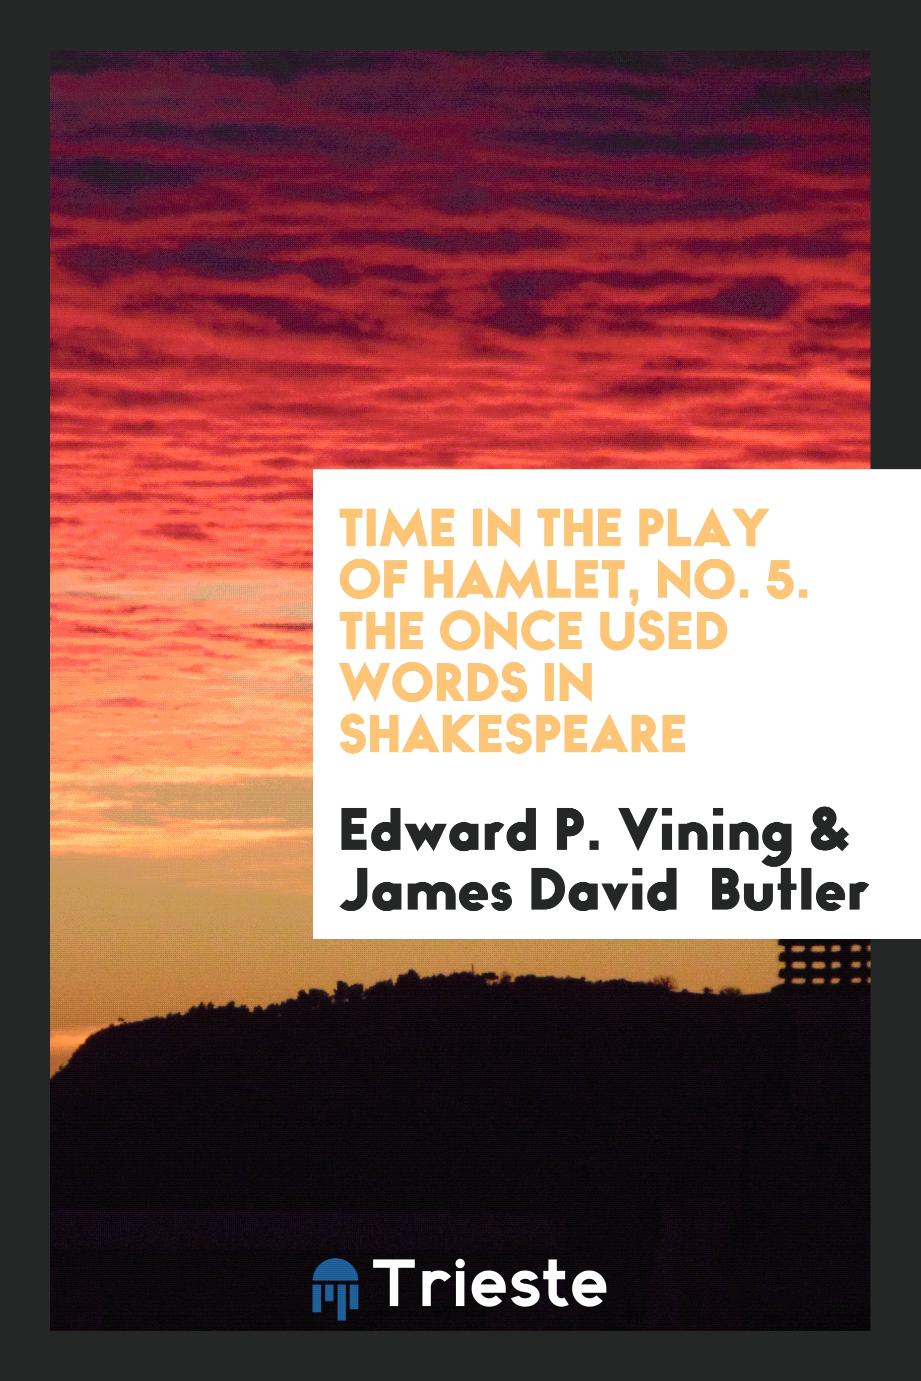 Time in the play of Hamlet, No. 5. The Once used words in Shakespeare